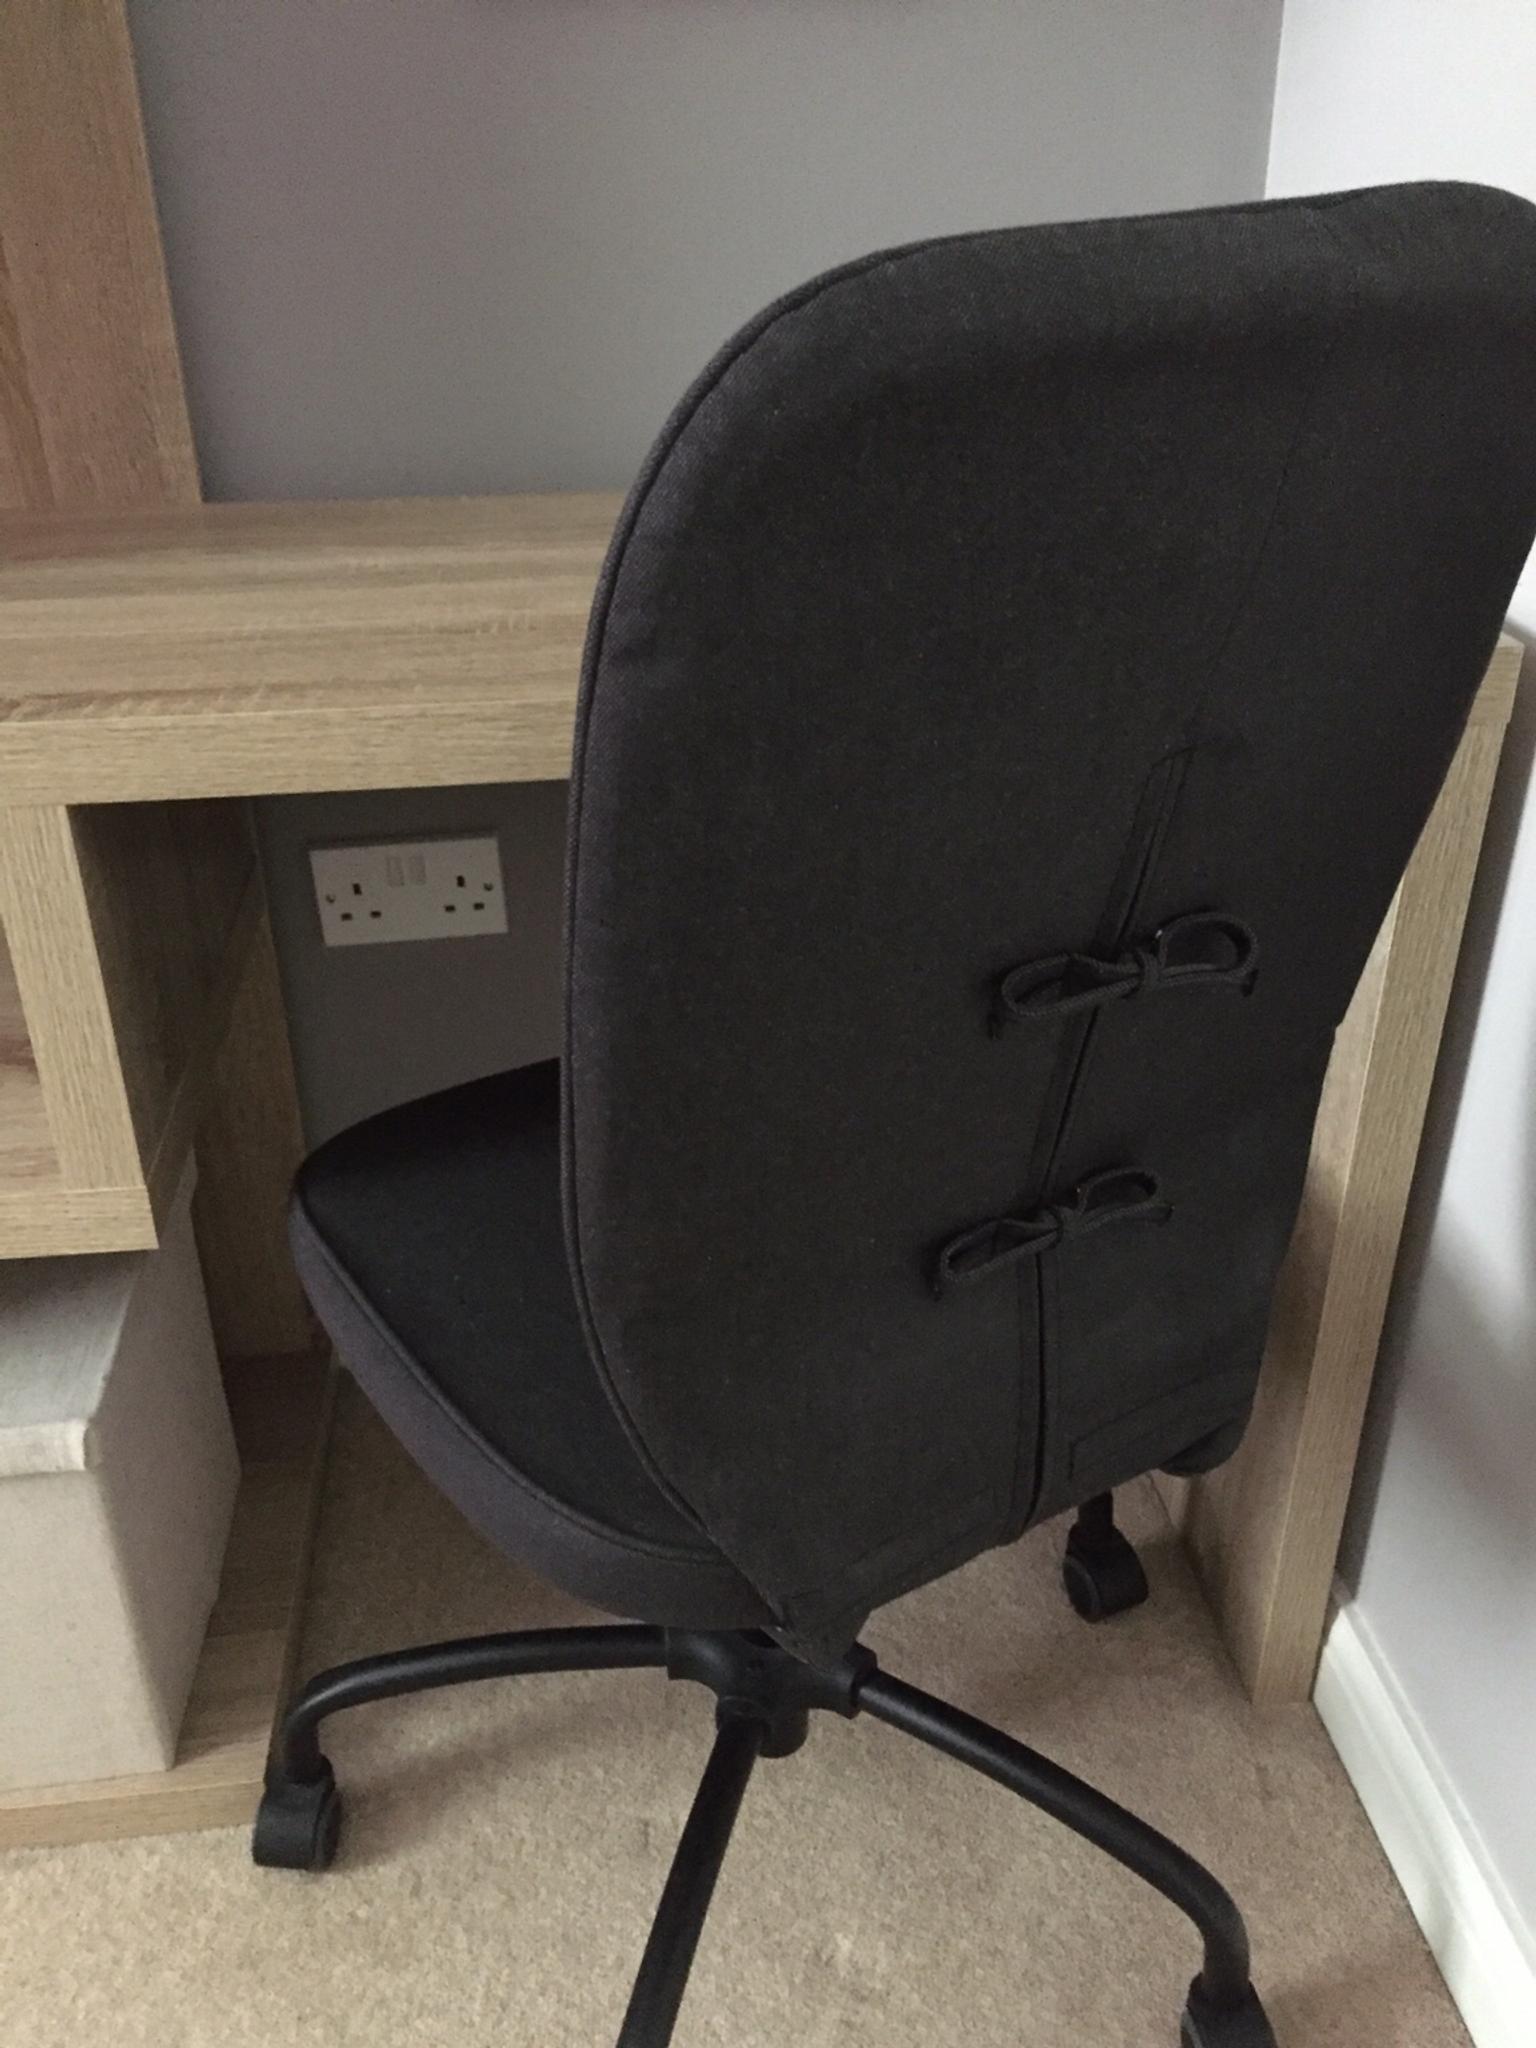 Next Desk Chair In Sg19 Sandy For 95 00 For Sale Shpock